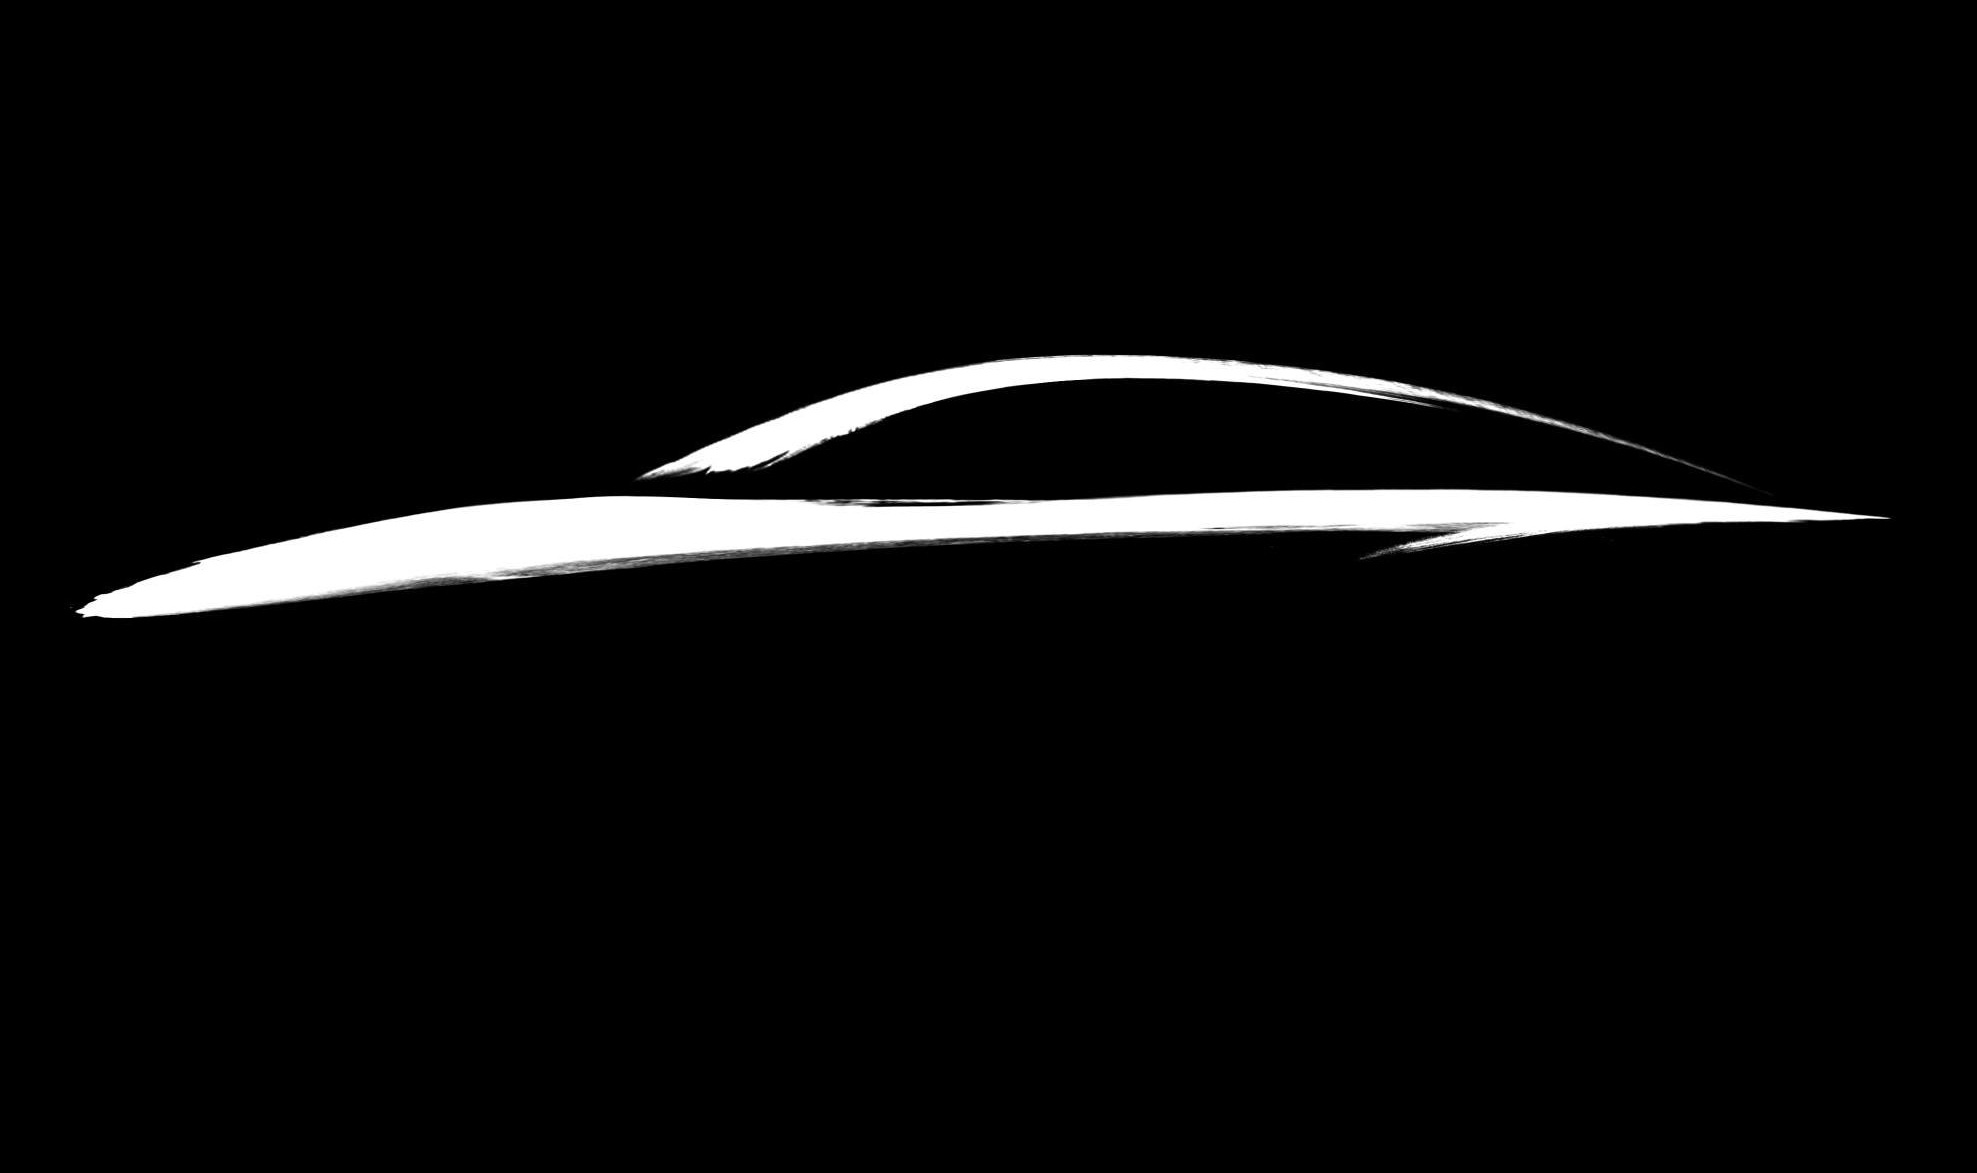 Infiniti QX55 confirmed as upcoming coupe SUV